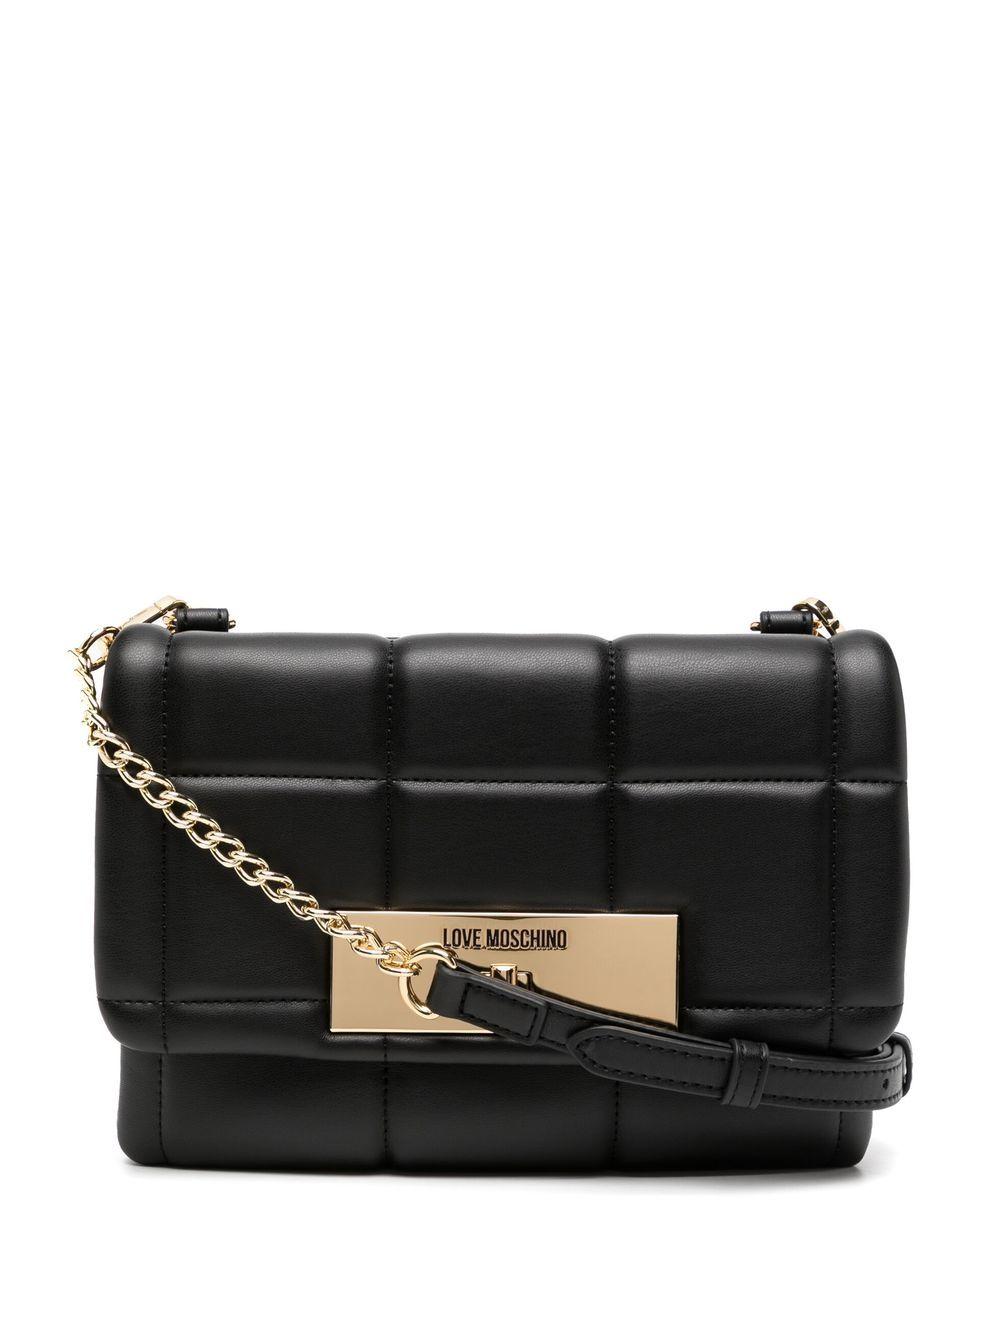 Love Moschino Gold Plaque Quilted Crossbody Bag in Black | Lyst